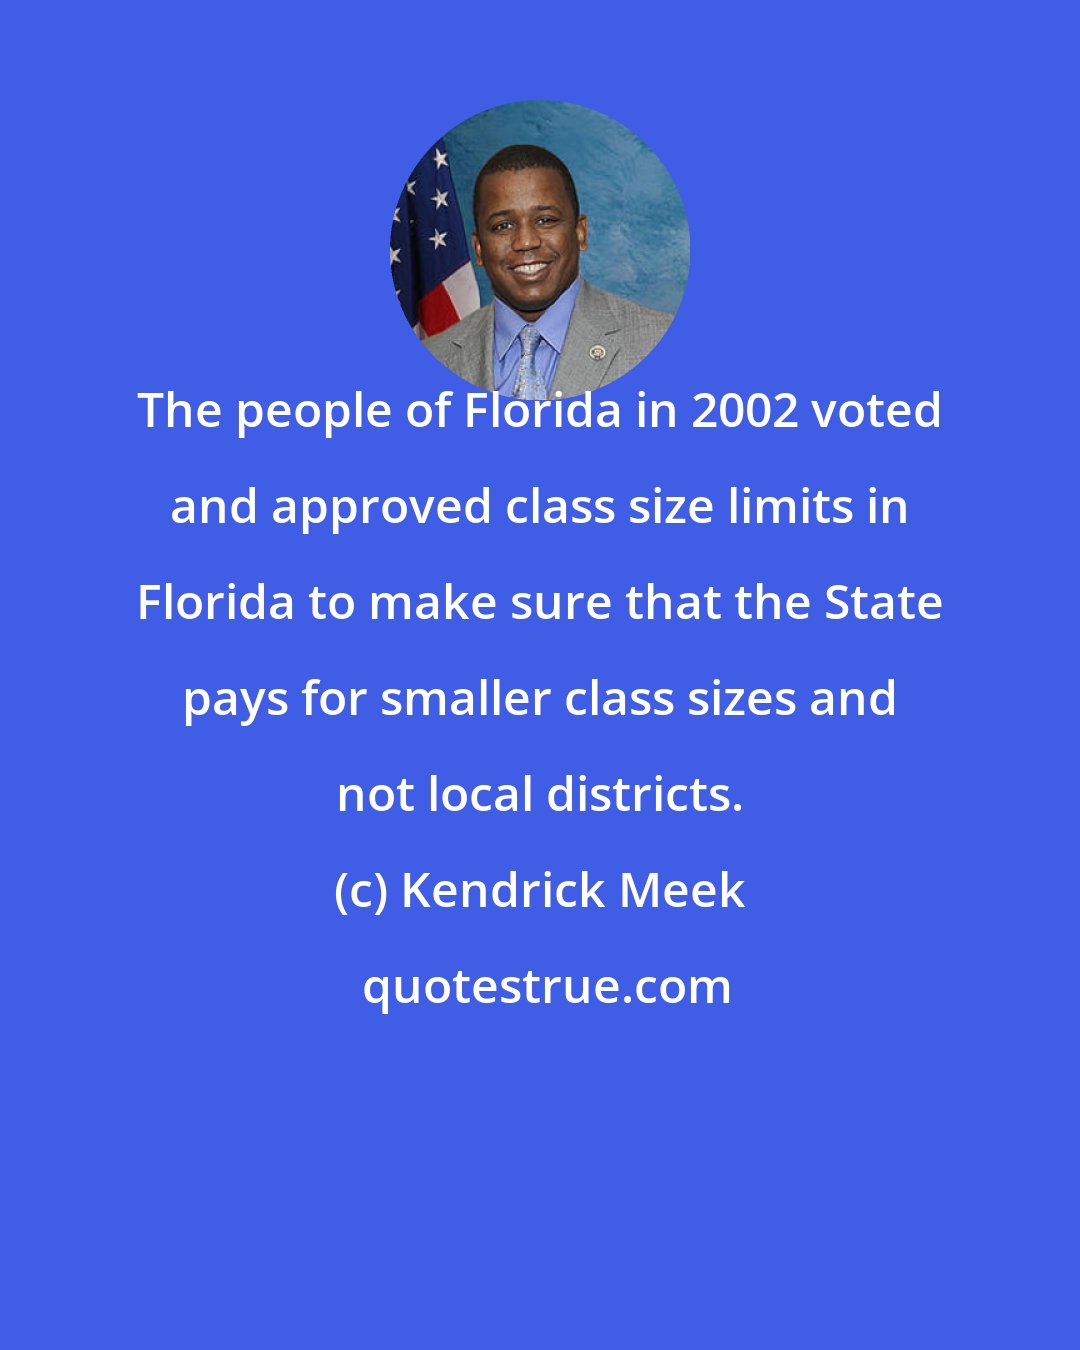 Kendrick Meek: The people of Florida in 2002 voted and approved class size limits in Florida to make sure that the State pays for smaller class sizes and not local districts.